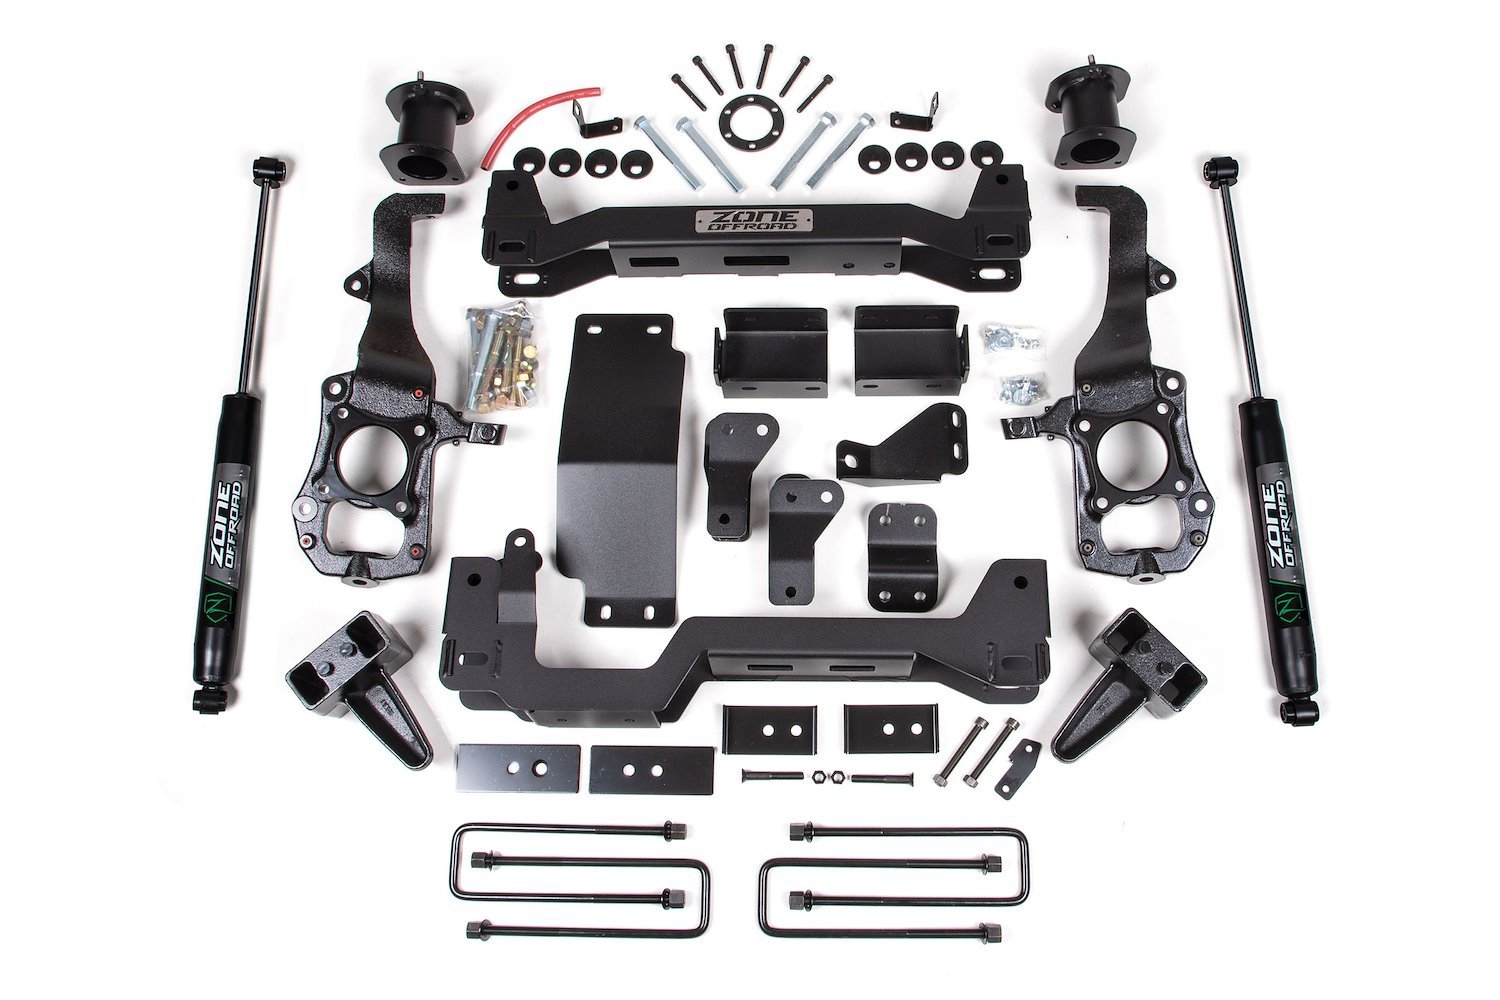 ZONF90N Zone 6" Lift Kit for Fits Select Ford F-150